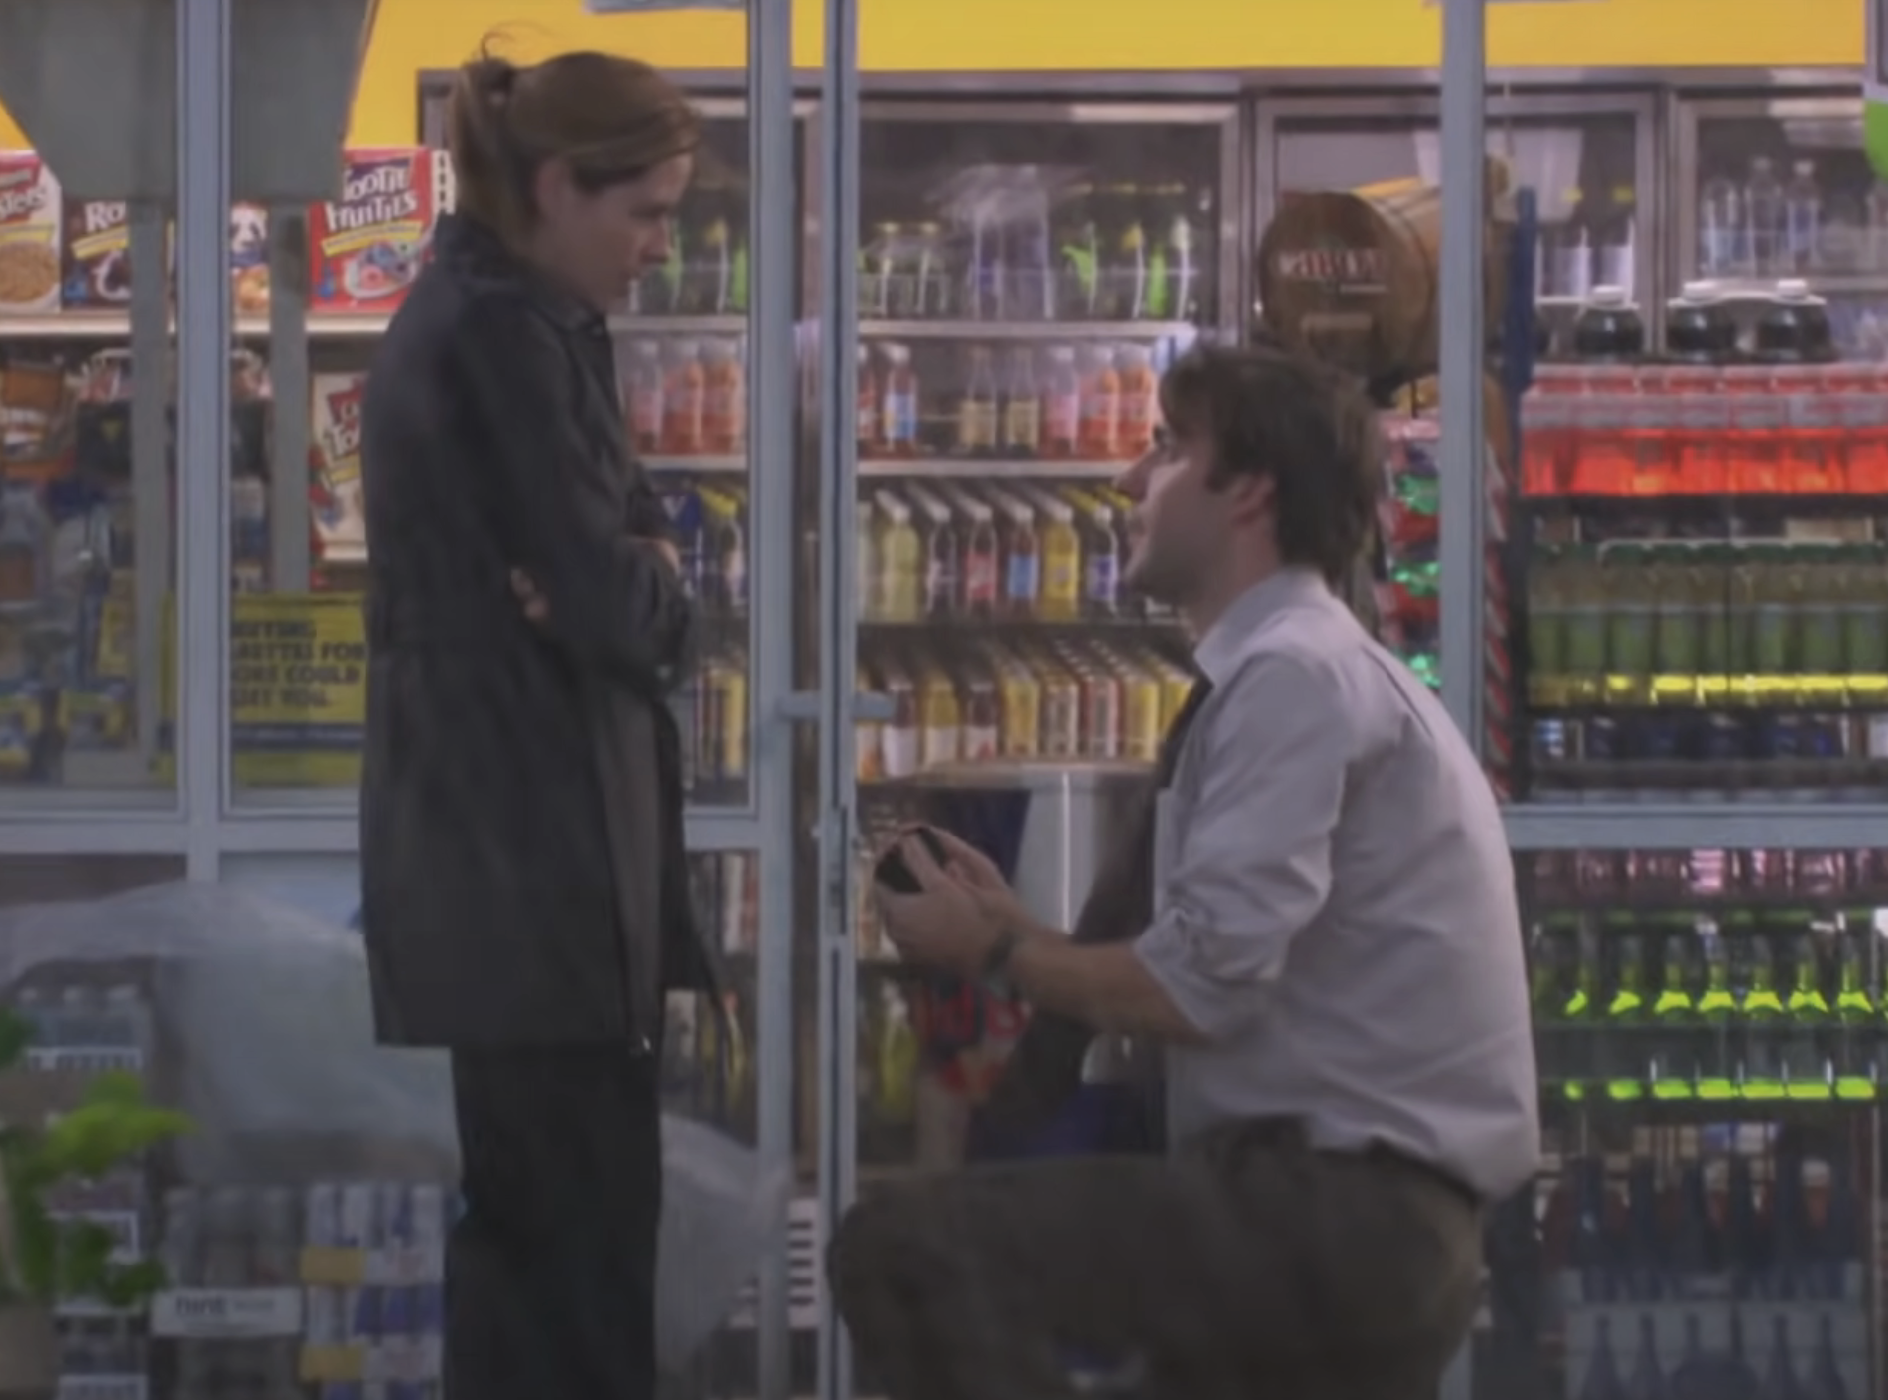 Jim proposes to Pam outside a convenience store